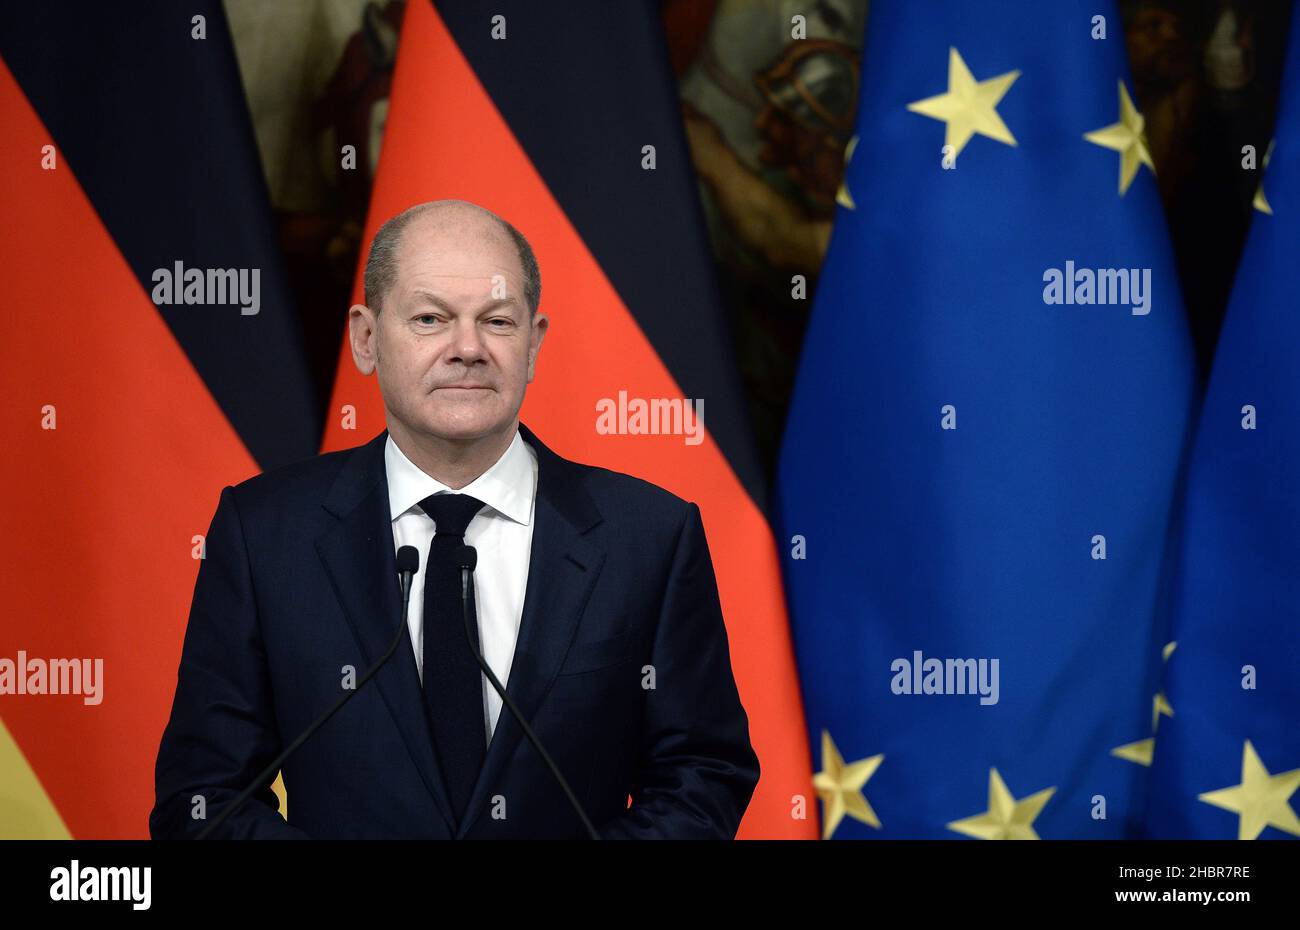 Roma, Italy. 20th Dec, 2021. Italy, Rome, December 20, 2021 : Italian Prime Minister Mario Draghi receives German Chancellor Olaf Scholz at Palazzo Chigi. In the photo : Olaf Scholz in press conference. Photo Credit: Fabio Cimaglia/Sintesi/Alamy Live News Stock Photo